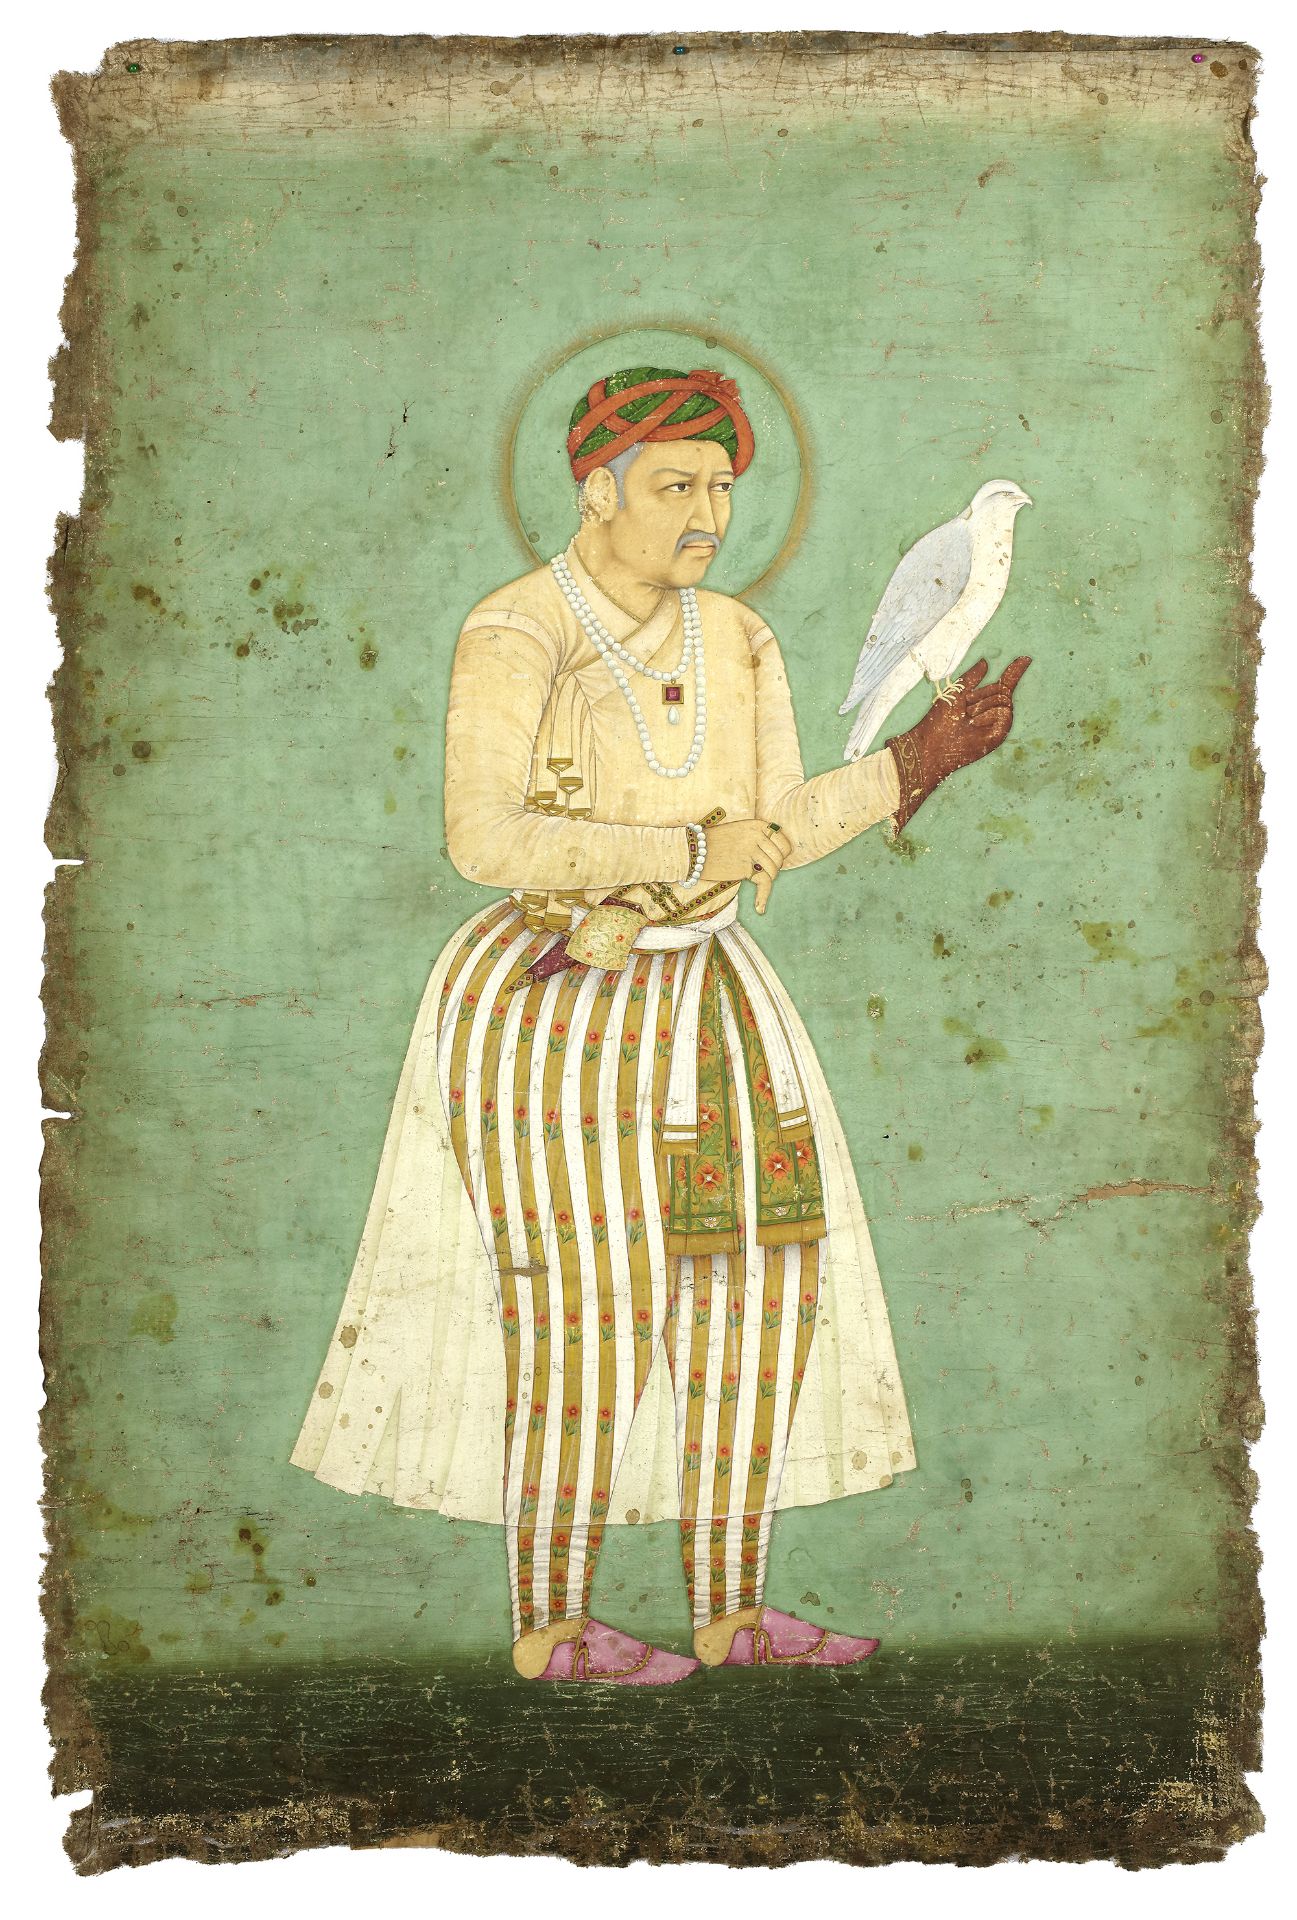 A MONUMENTAL PORTRAIT OF THE EMPEROR AKBAR, MUGHAL, INDIA, LATE 17TH-EARLY 18TH CENTURY